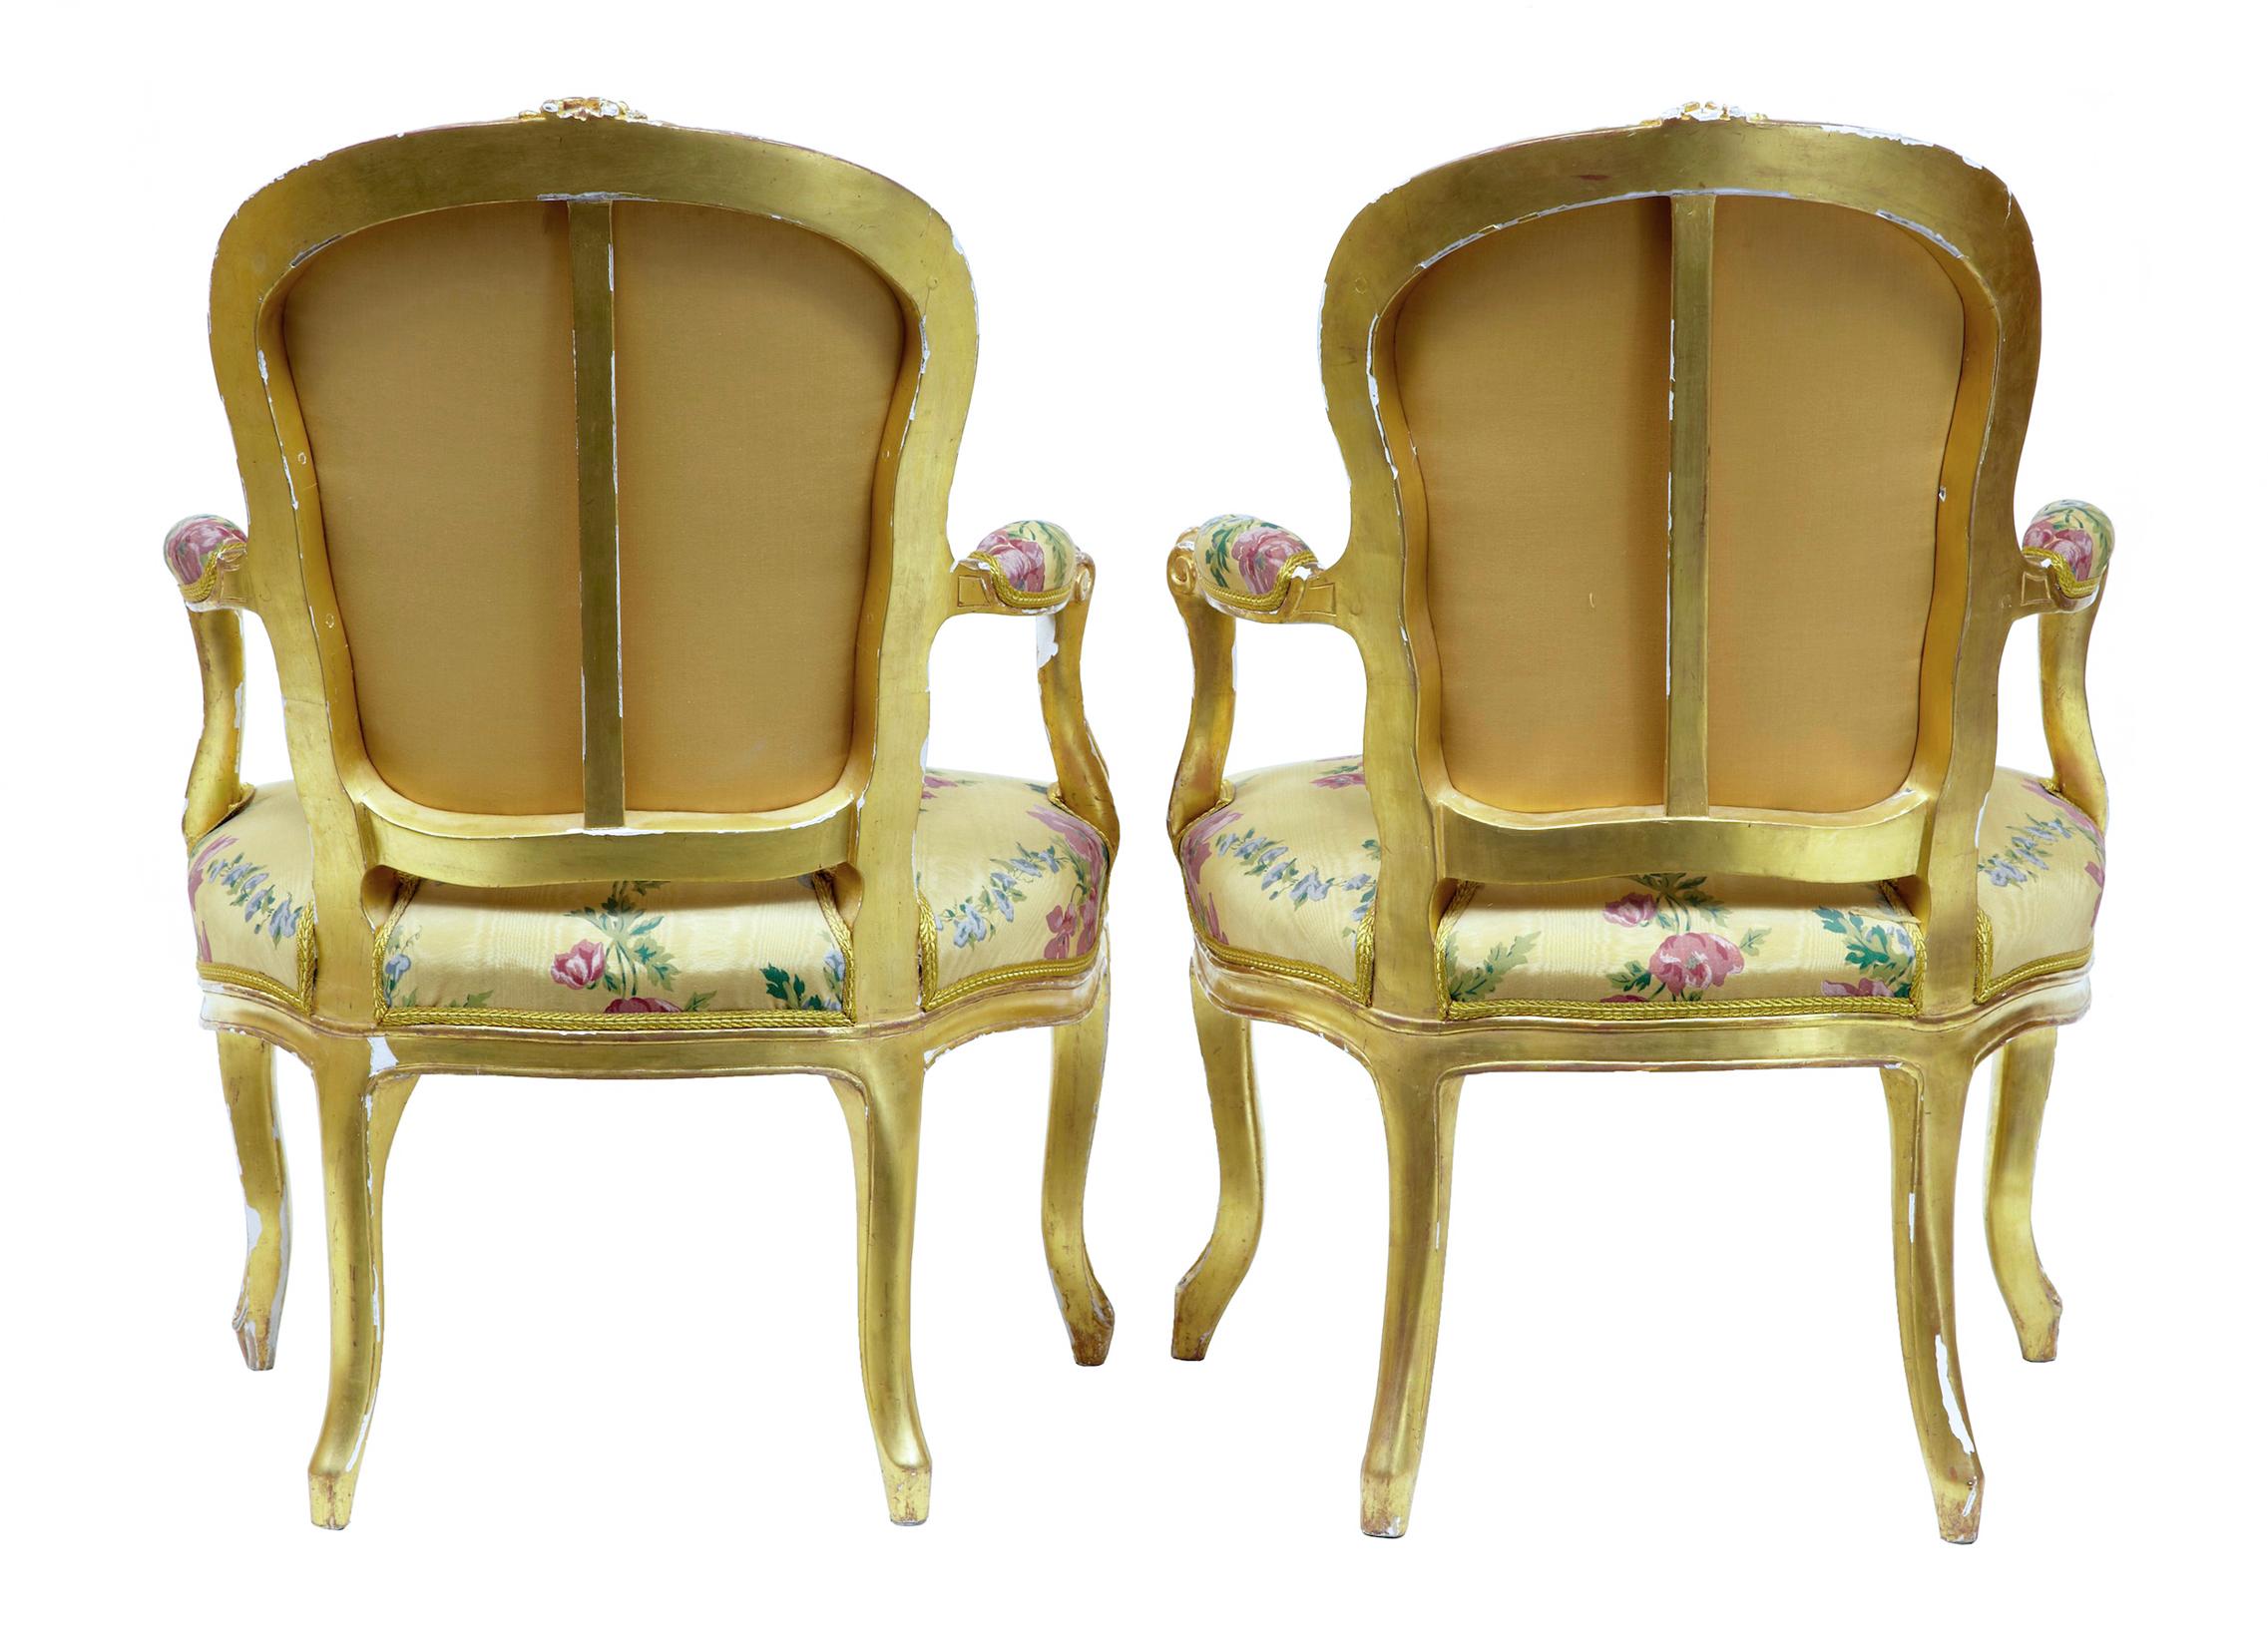 French Pair of 18th Century Louis XV Gilt Armchairs by Michard